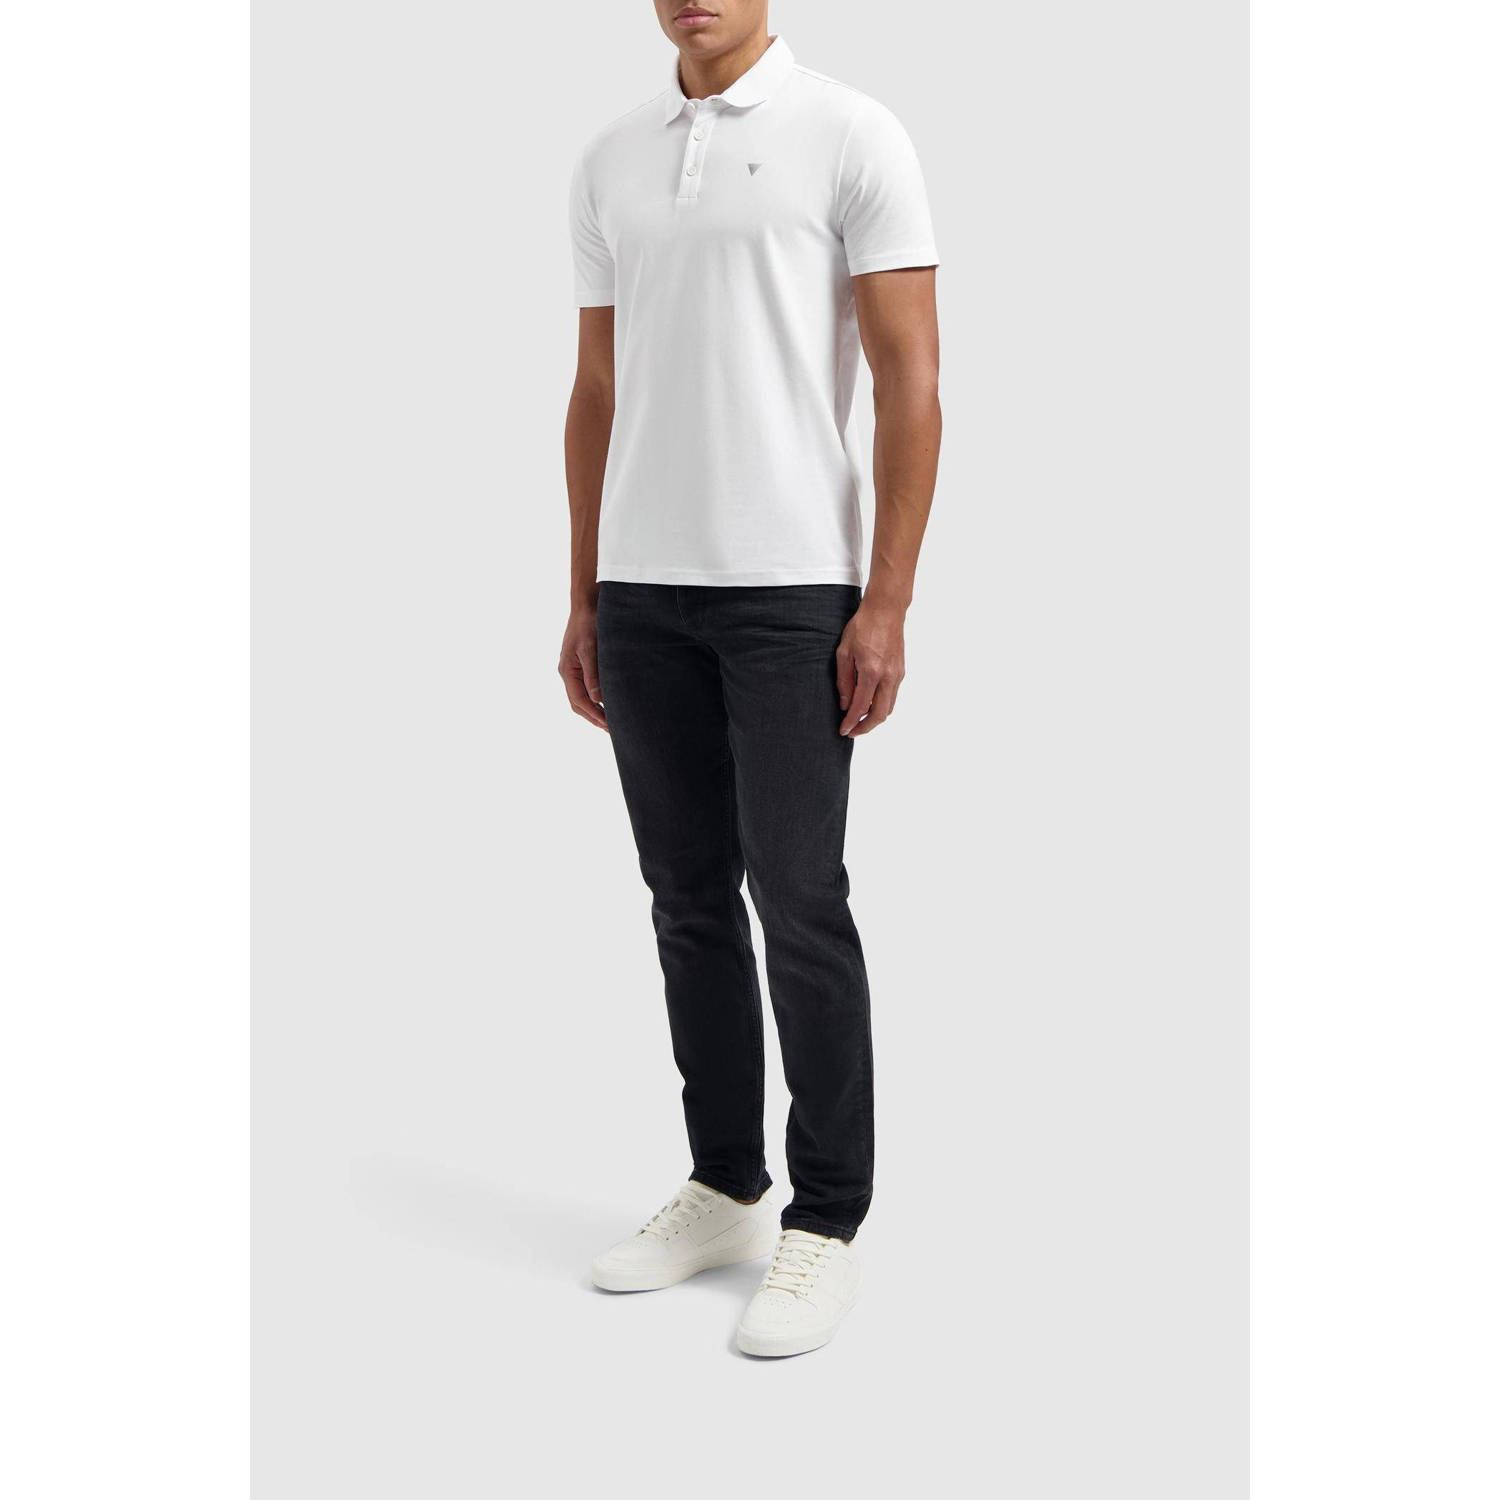 Pure Path polo met logo wit